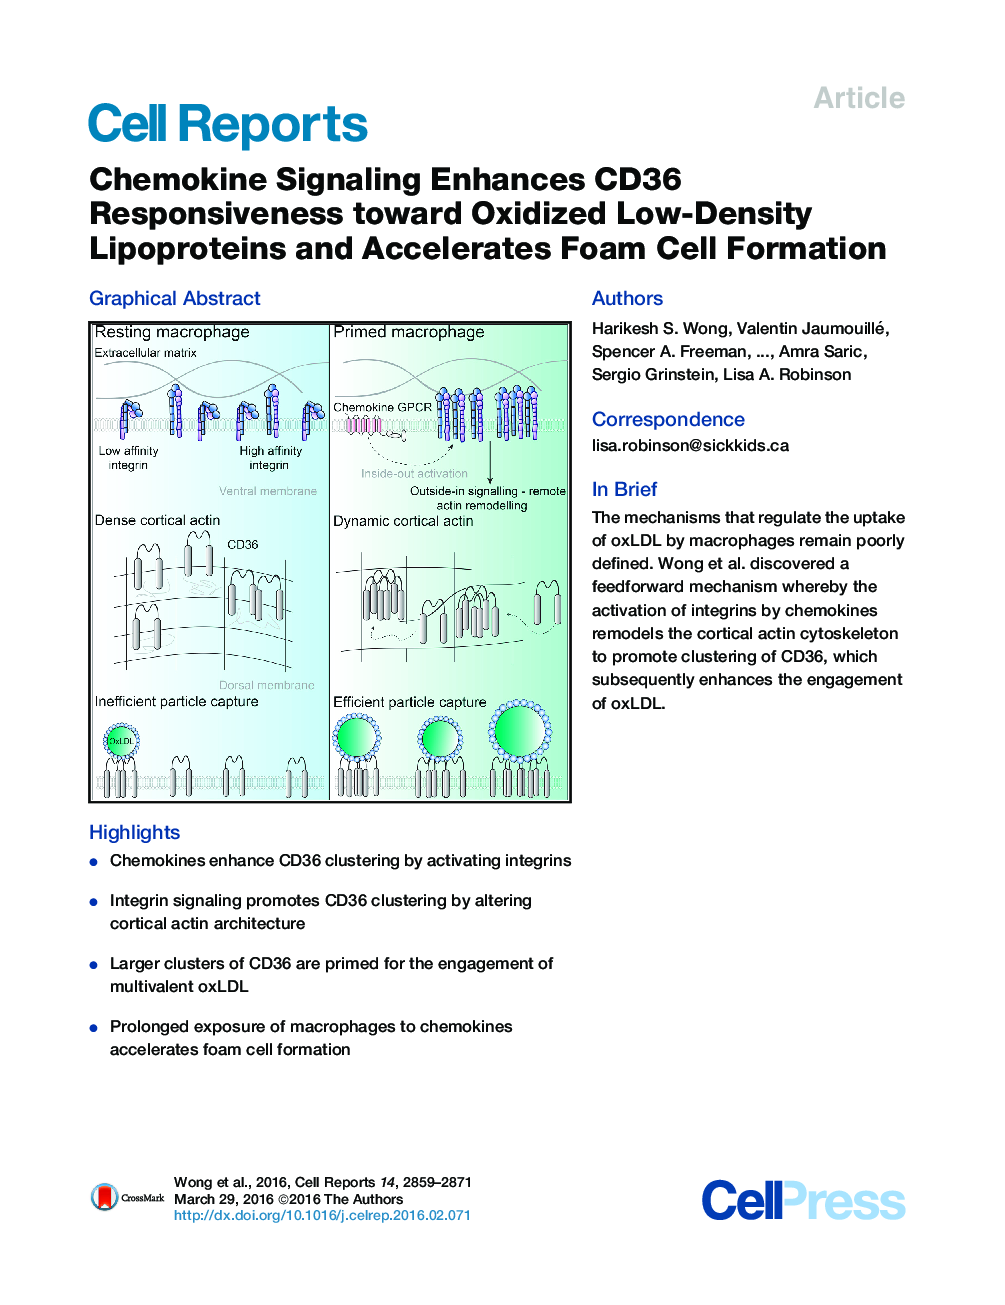 Chemokine Signaling Enhances CD36 Responsiveness toward Oxidized Low-Density Lipoproteins and Accelerates Foam Cell Formation 